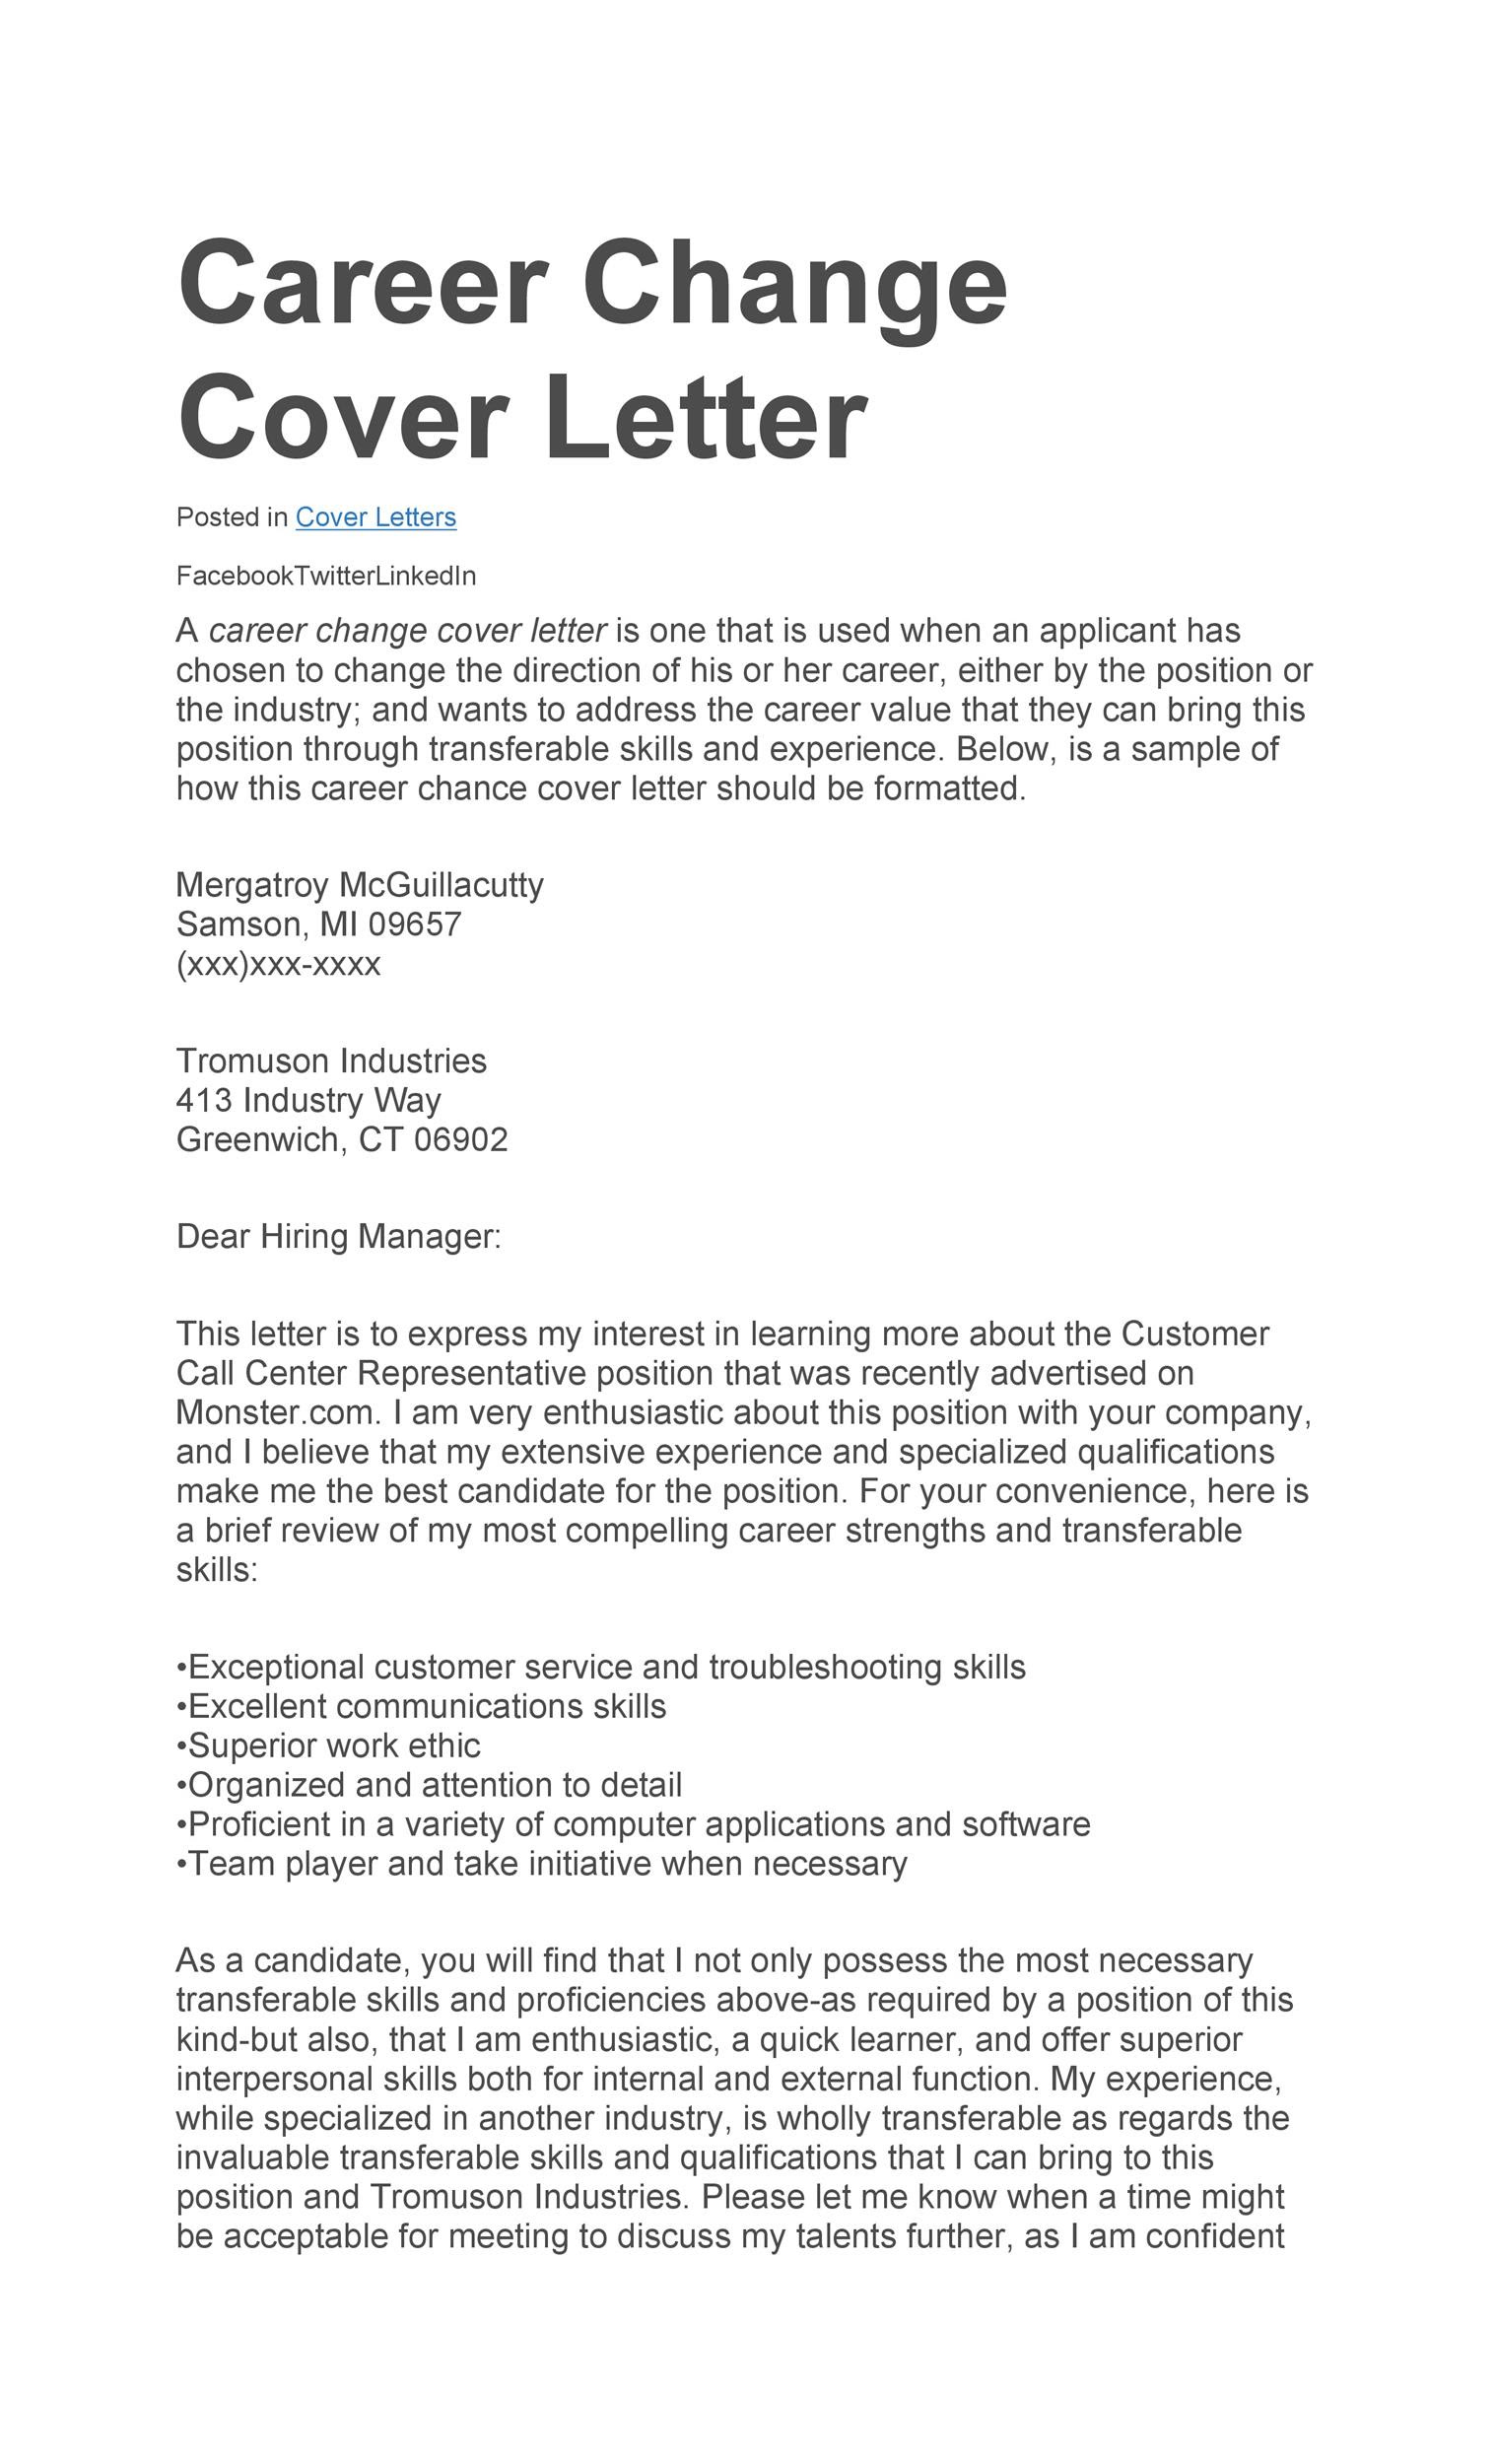 Career Change Cover Letter Template from lh6.googleusercontent.com